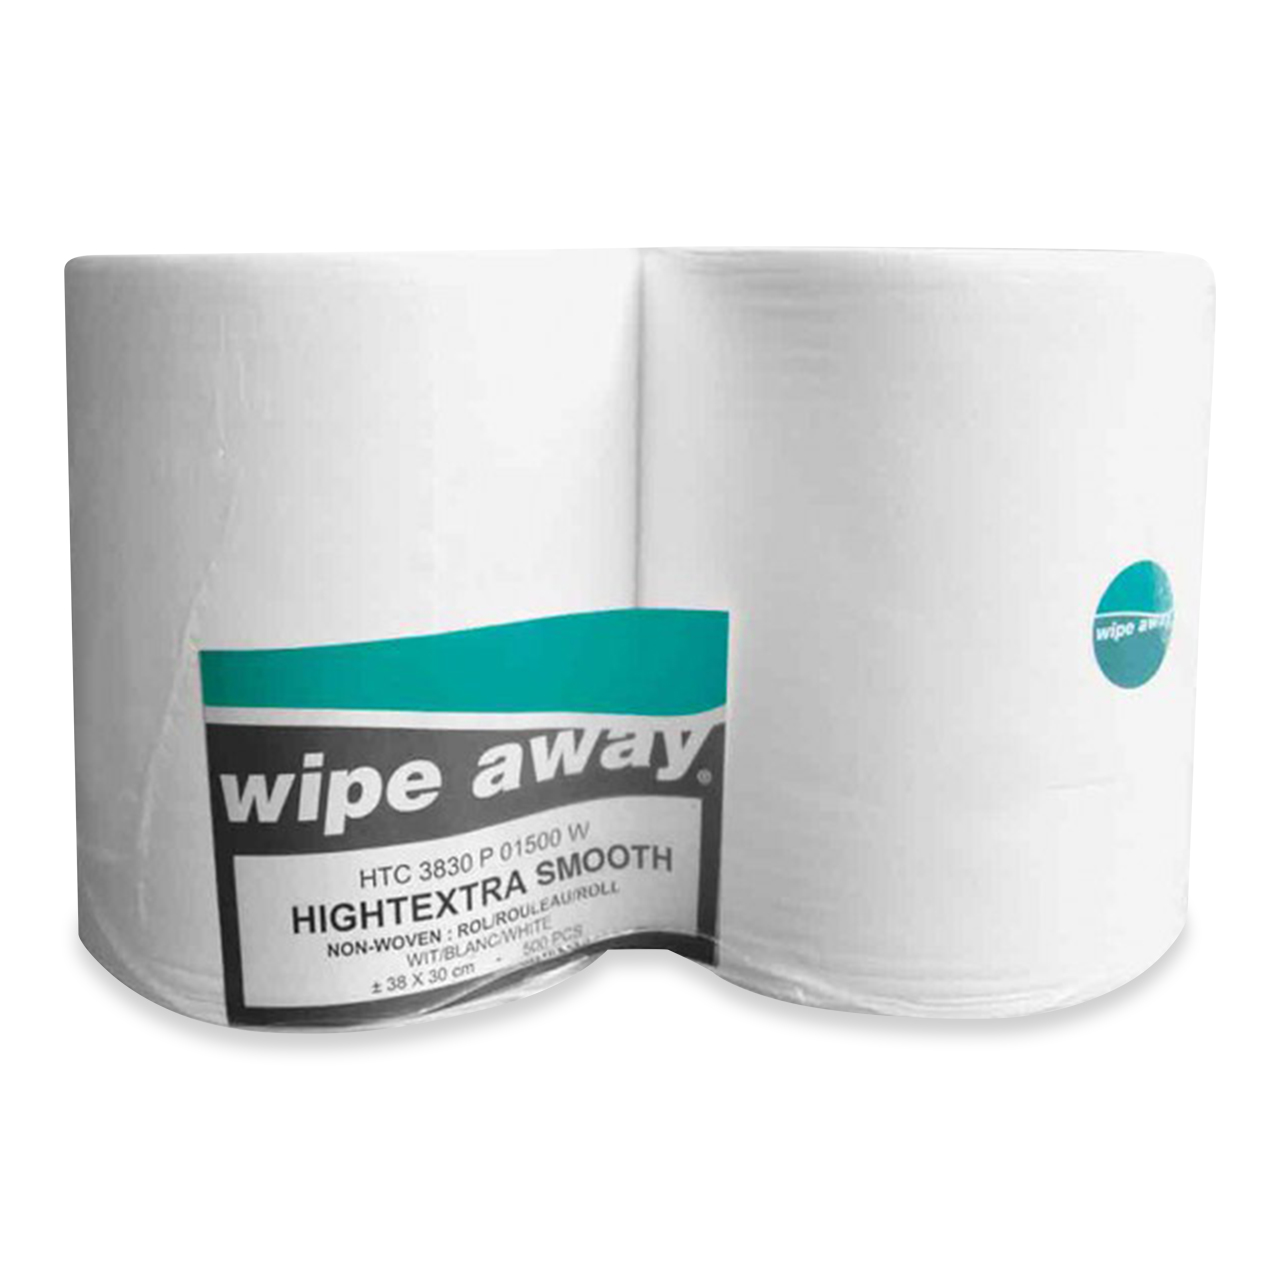 wipe away Rouleau HIGHTExtra SMOOTH